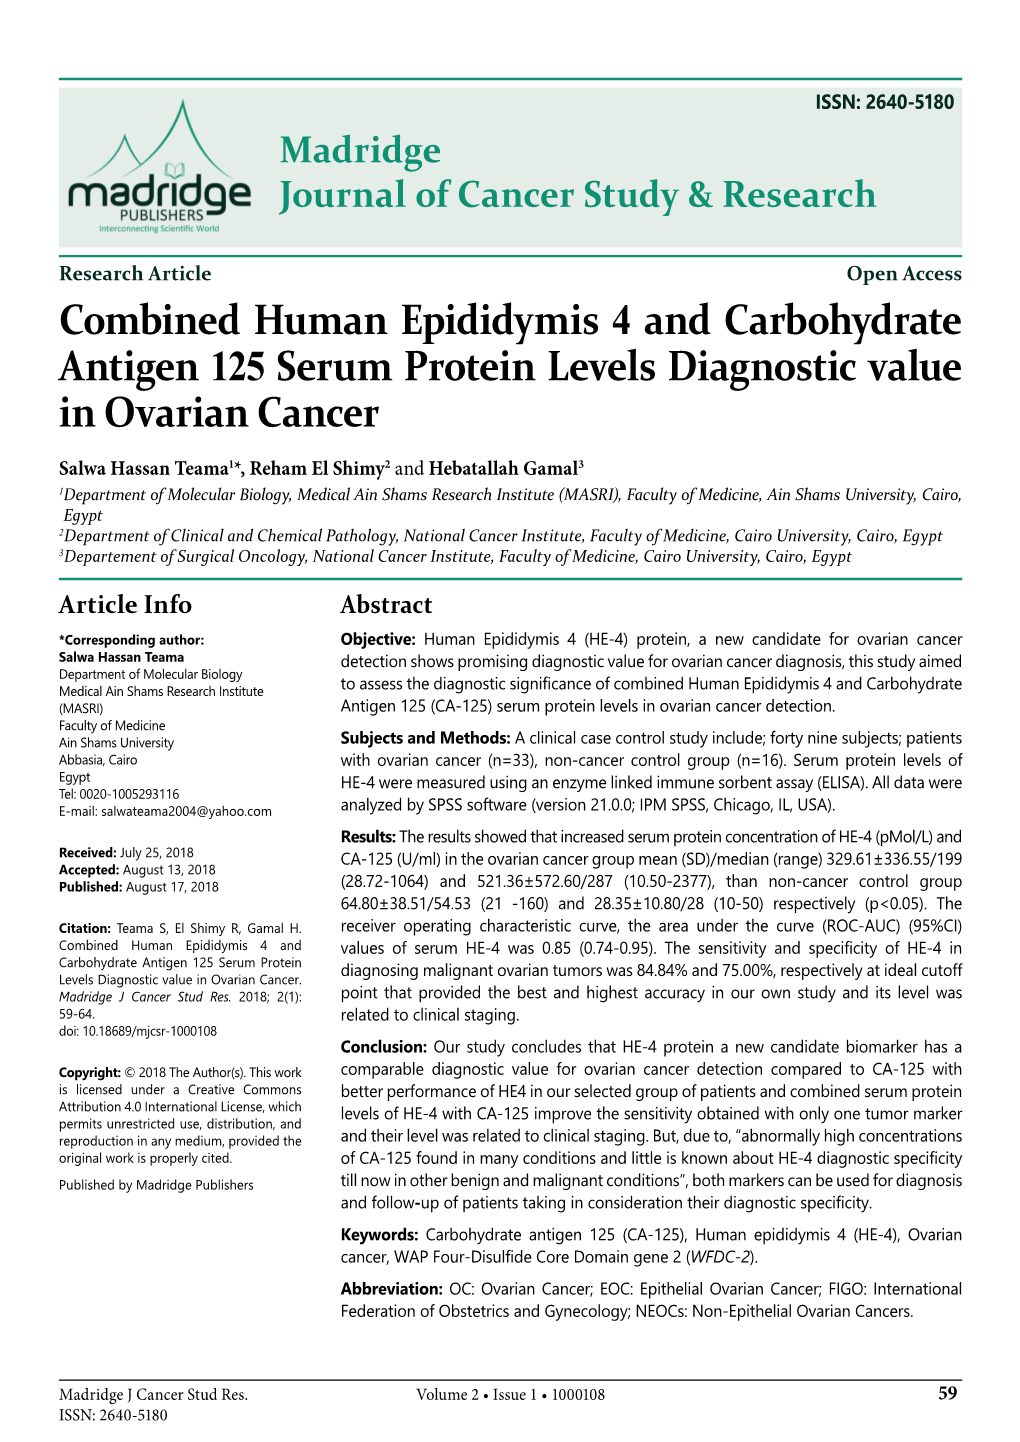 Combined Human Epididymis 4 and Carbohydrate Antigen 125 Serum Protein Levels Diagnostic Value in Ovarian Cancer